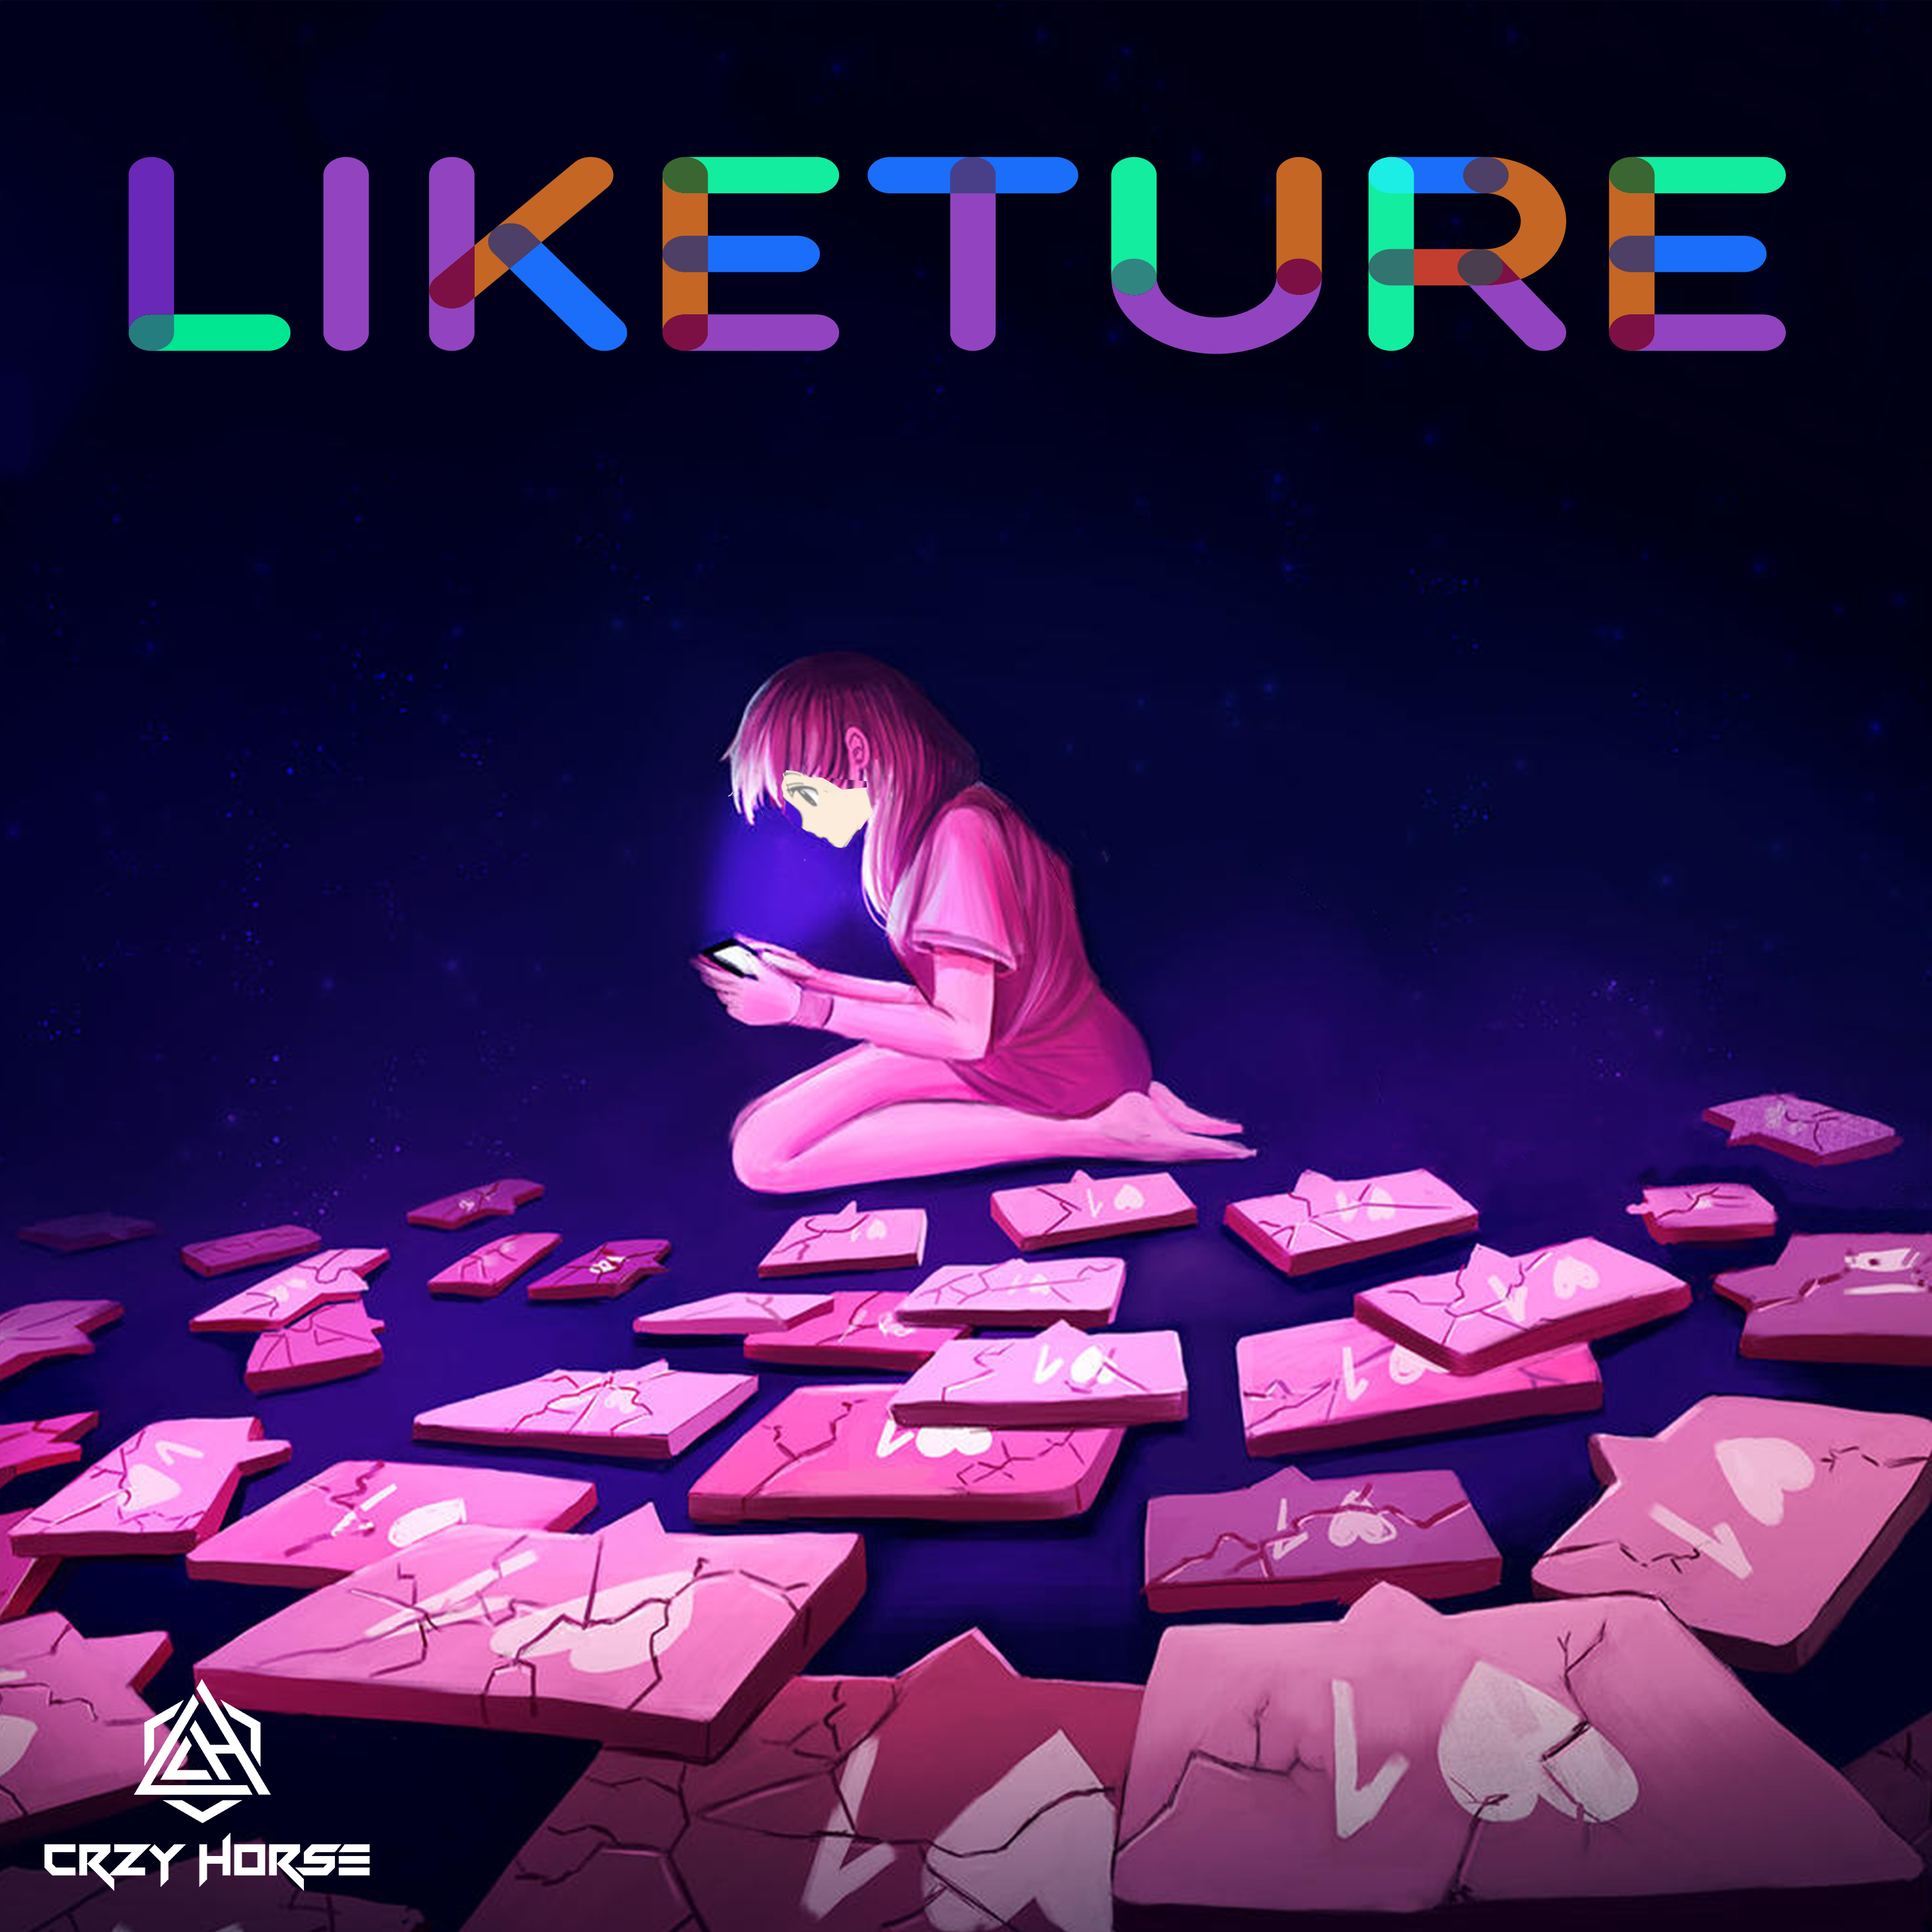 New single ‘Liketure’ from ‘Crzy Horse’ is a portmanteau of the words “Like” and “Culture” and is out now